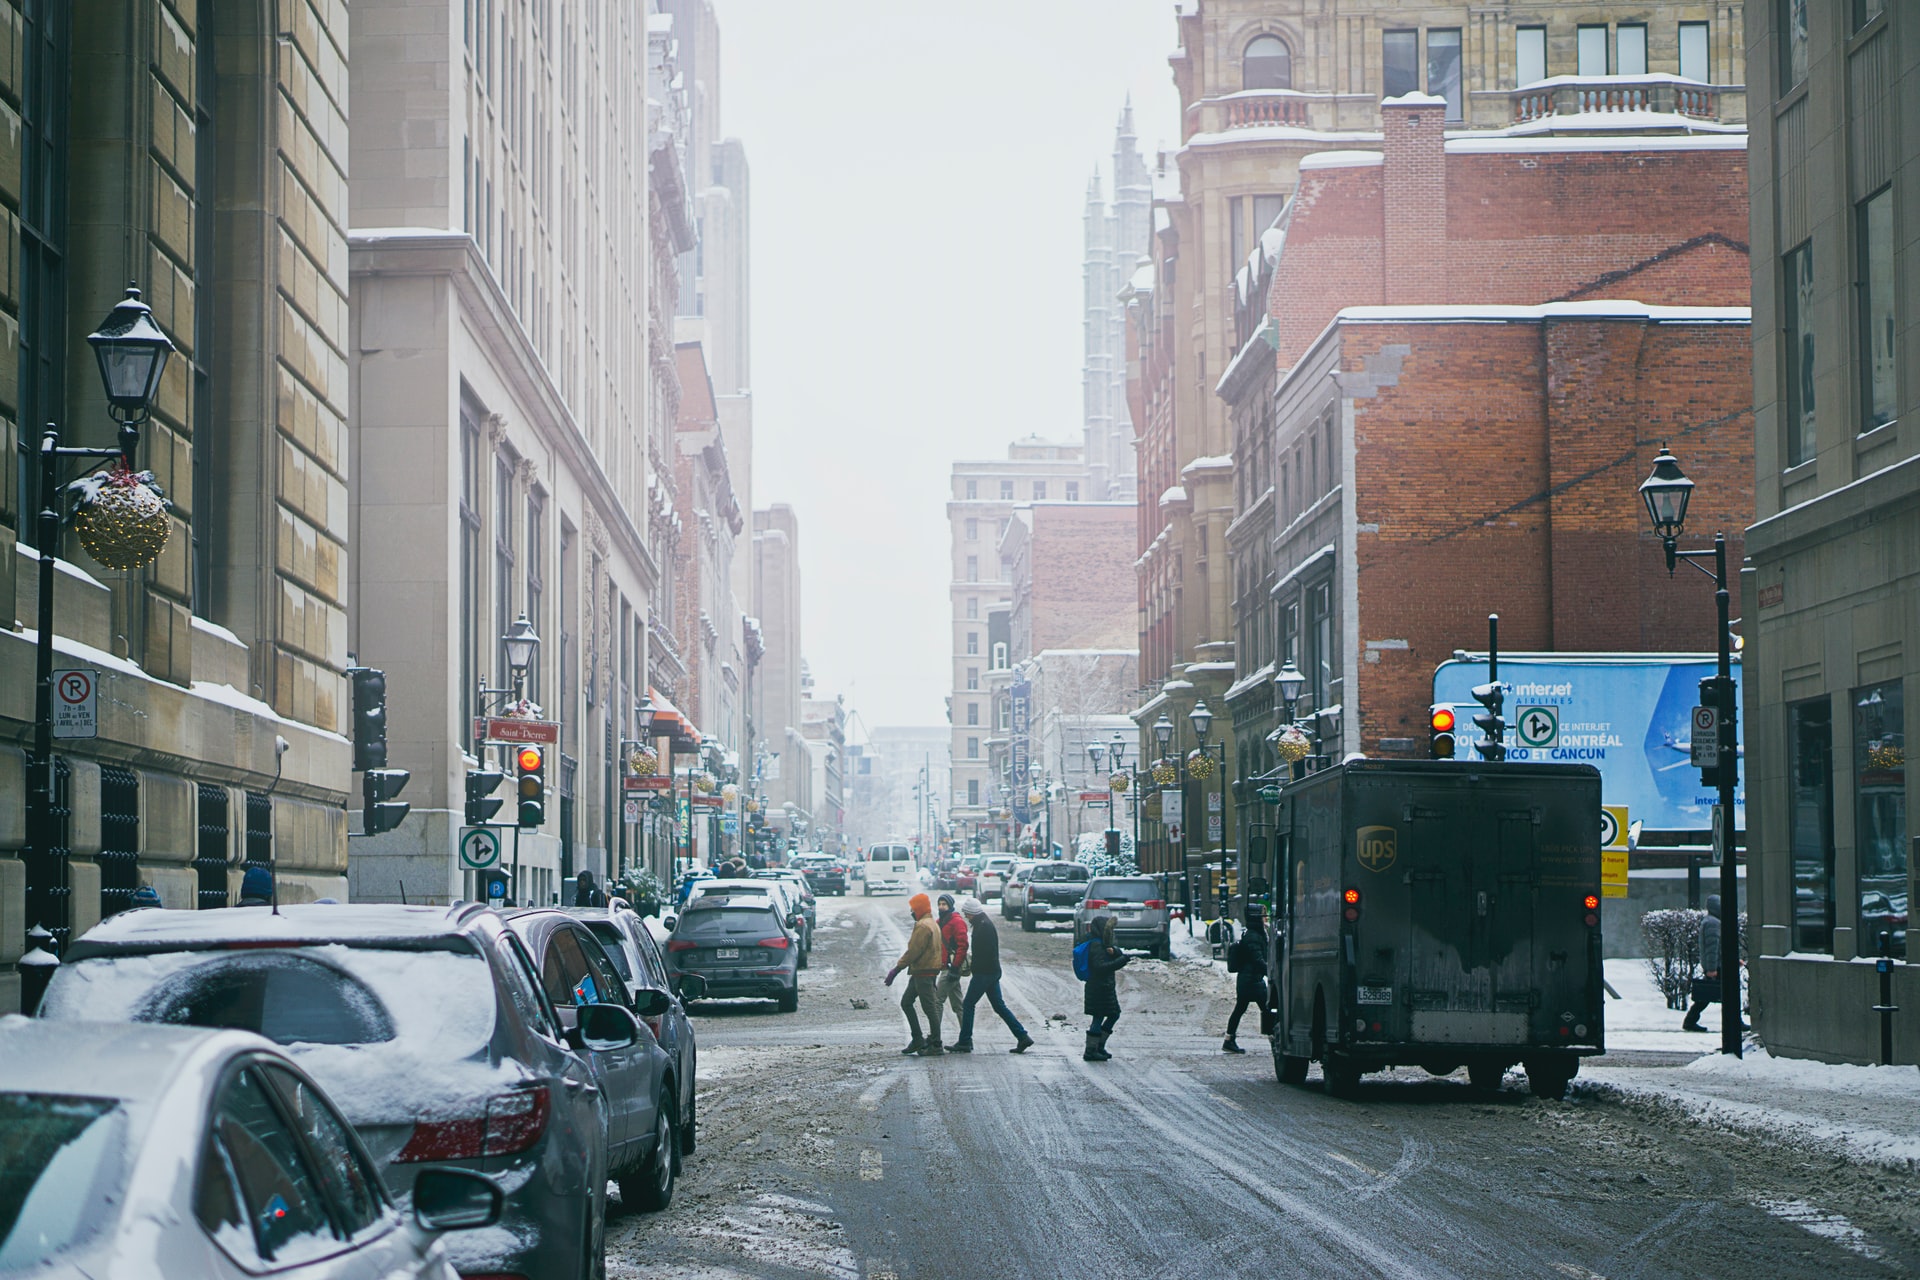 A snowy downtown street representing changes to occupier's liability in Ontario regarding slip and falls due to snow and ice